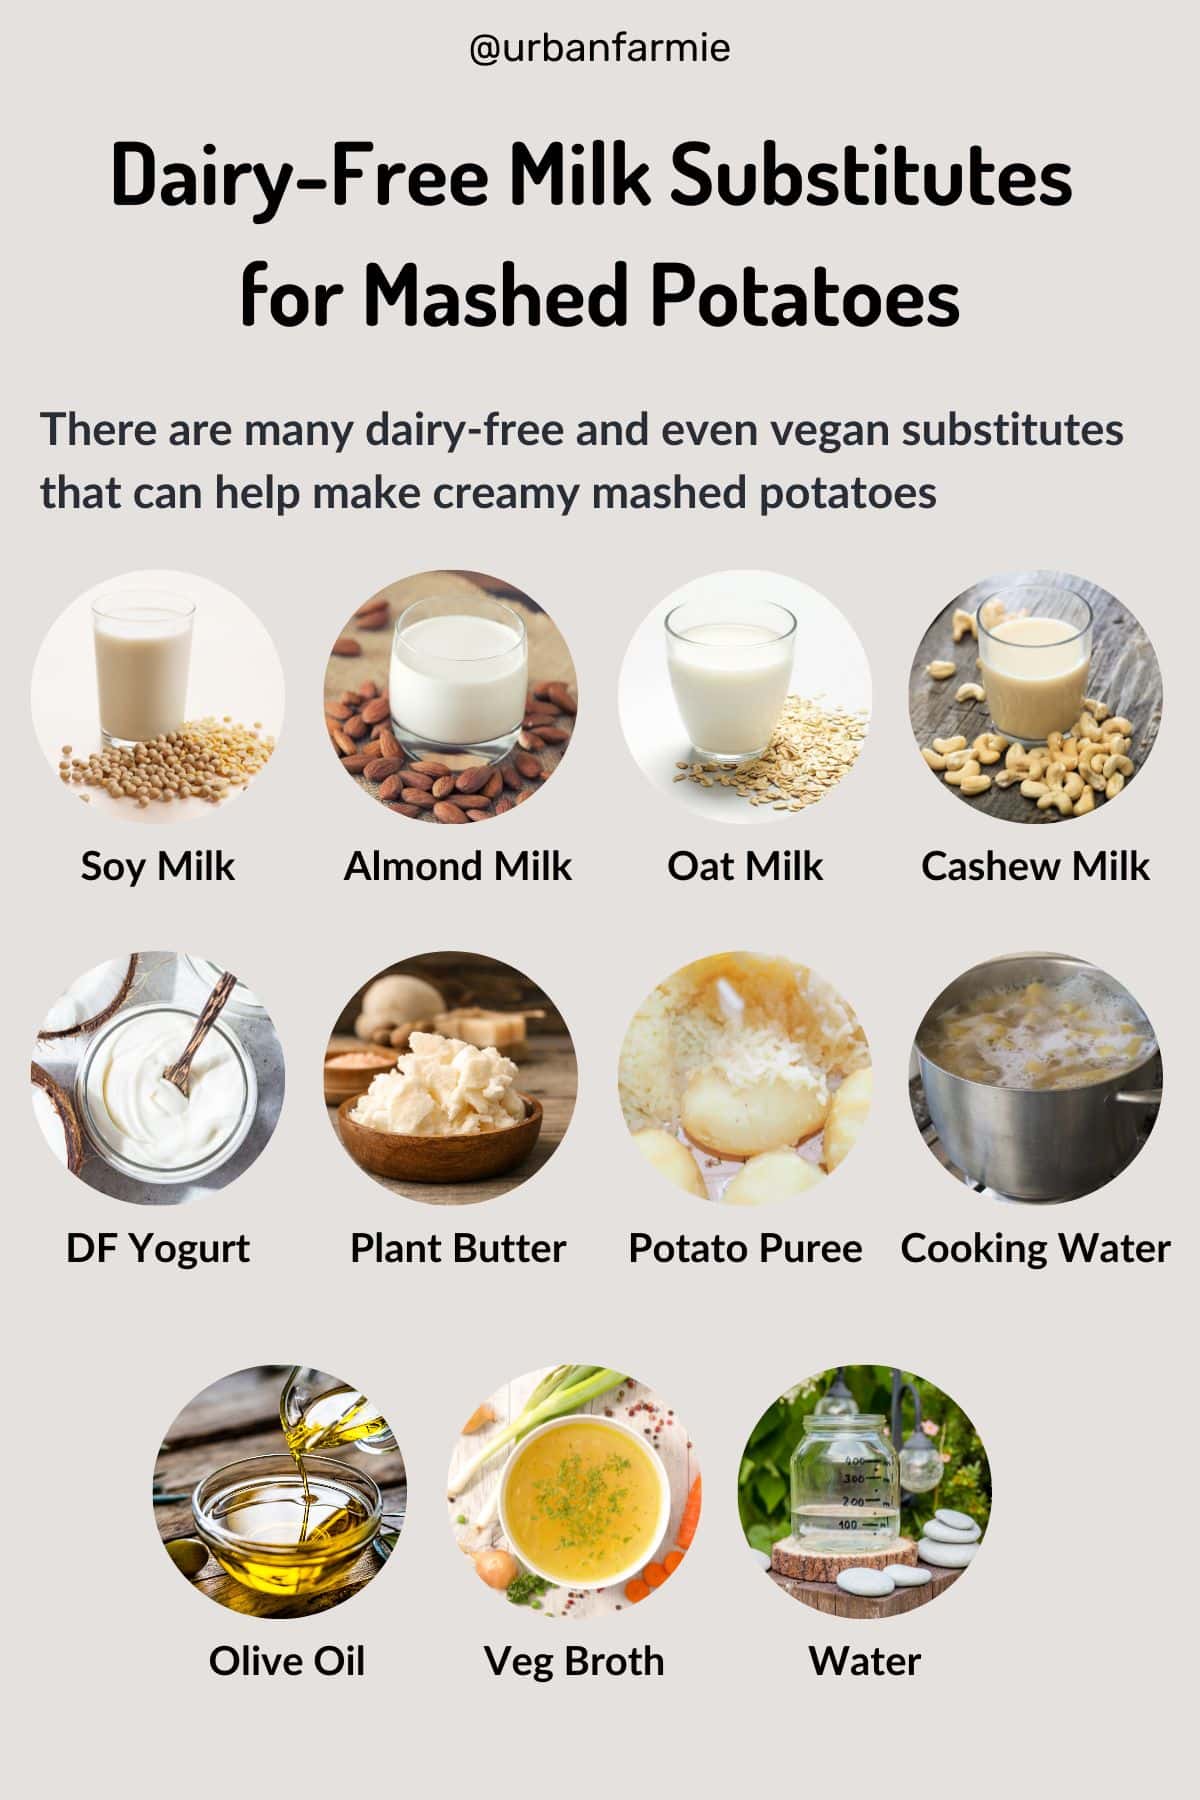 Graphic image with collage of potential dairy-free milk substitutes for mashed potatoes